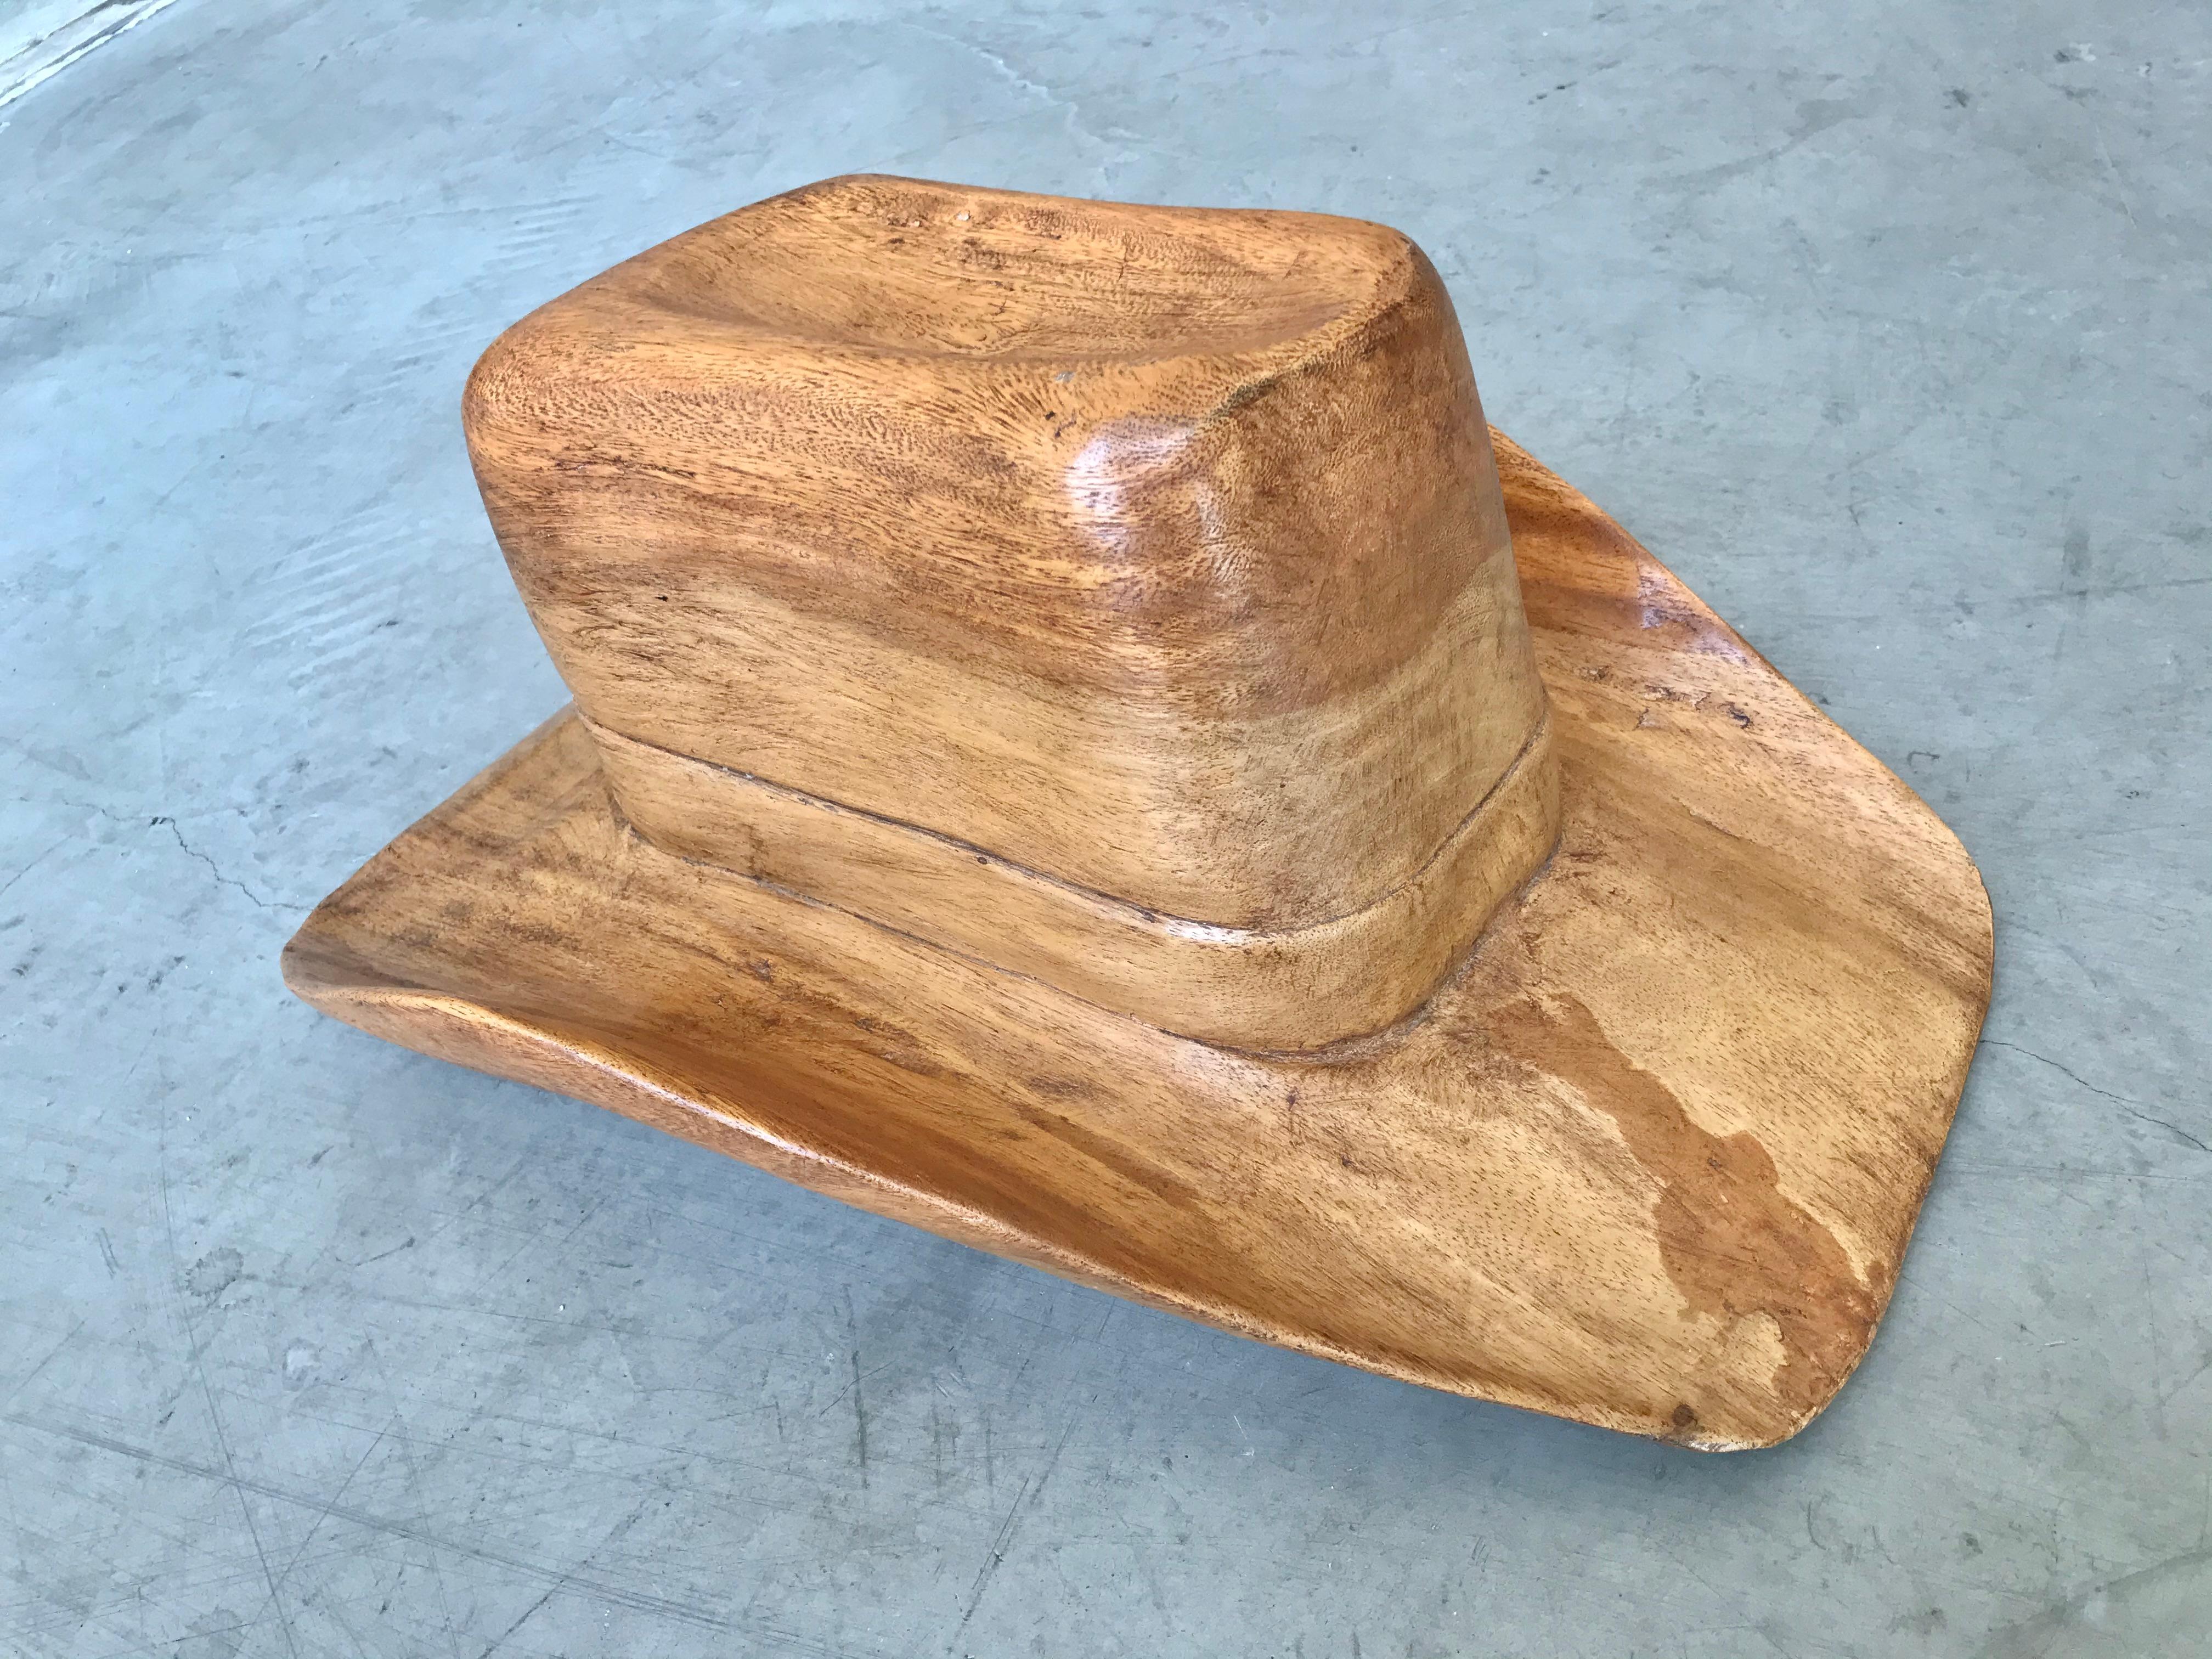 Rustic hand carved wood cowboy hat. There is a carved belt buckle on one side of the hat and a carved sash around the brim of the hat. Fantastic piece of Folk Art. Excellent workmanship. Large scale.